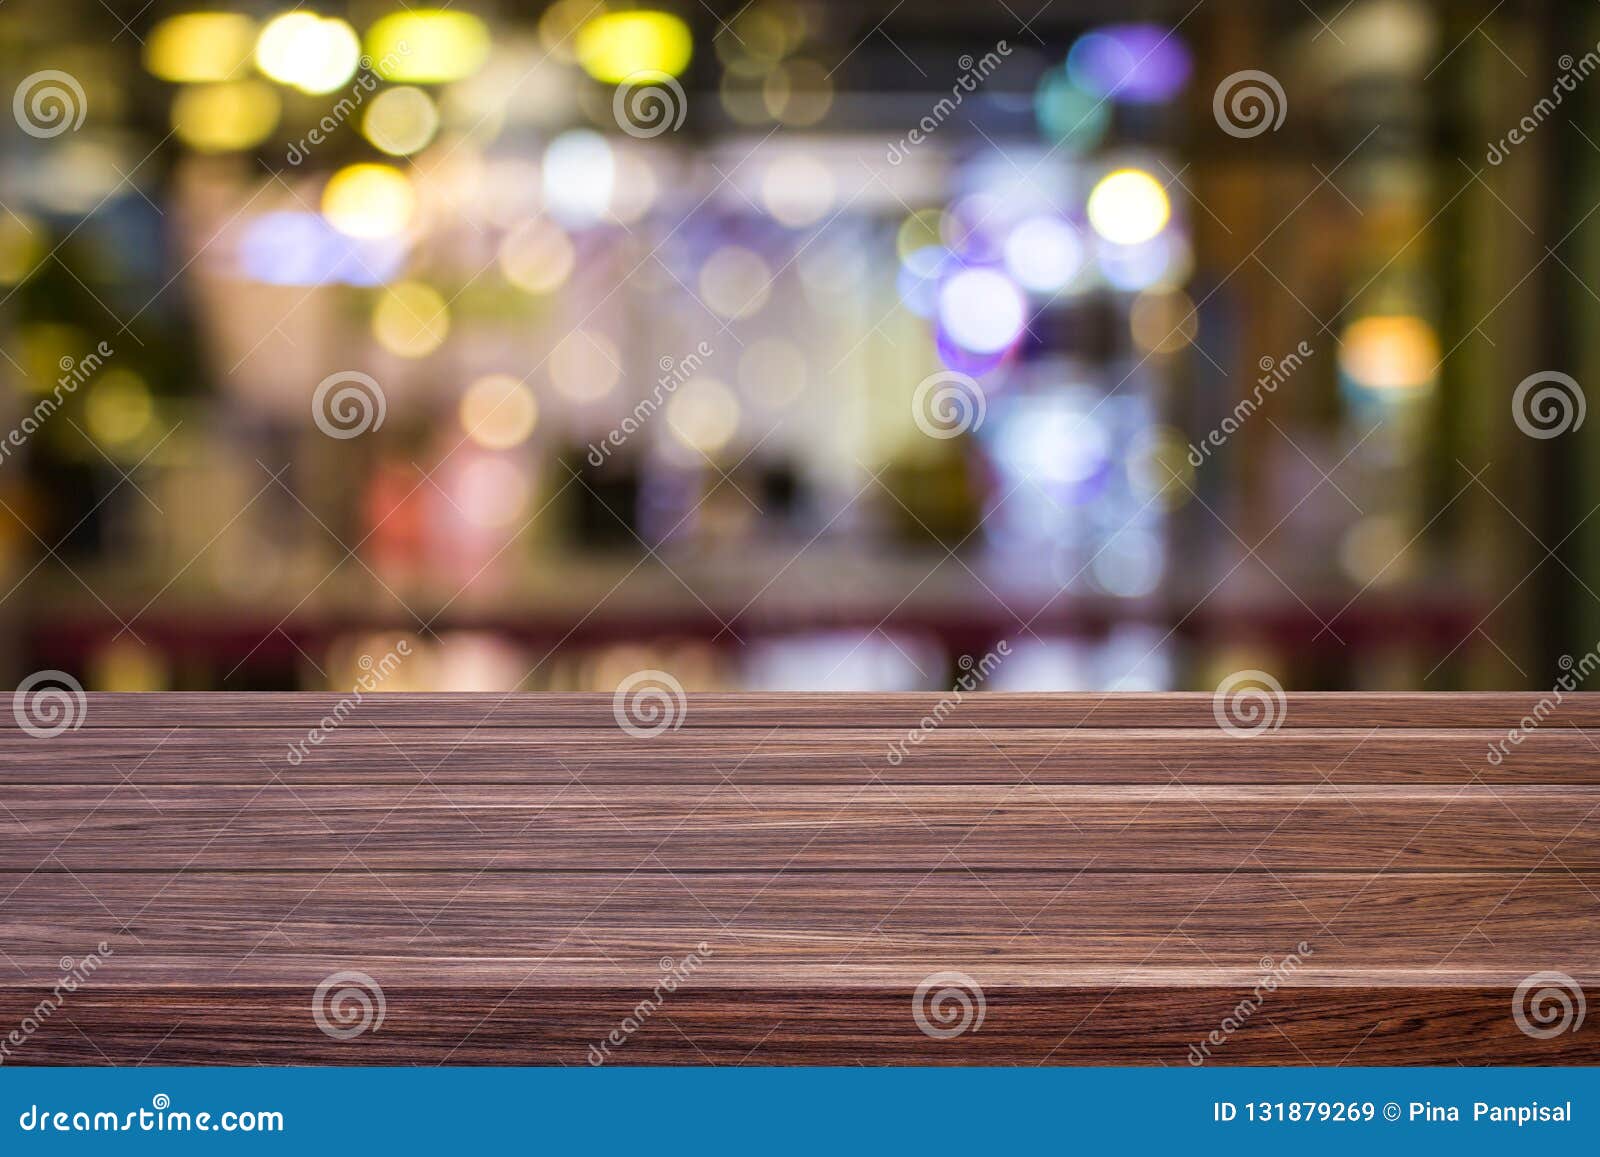 blur cafe restaurant or coffee shop empty of dark wood table with blurred light gold bokeh abstract background for montage product